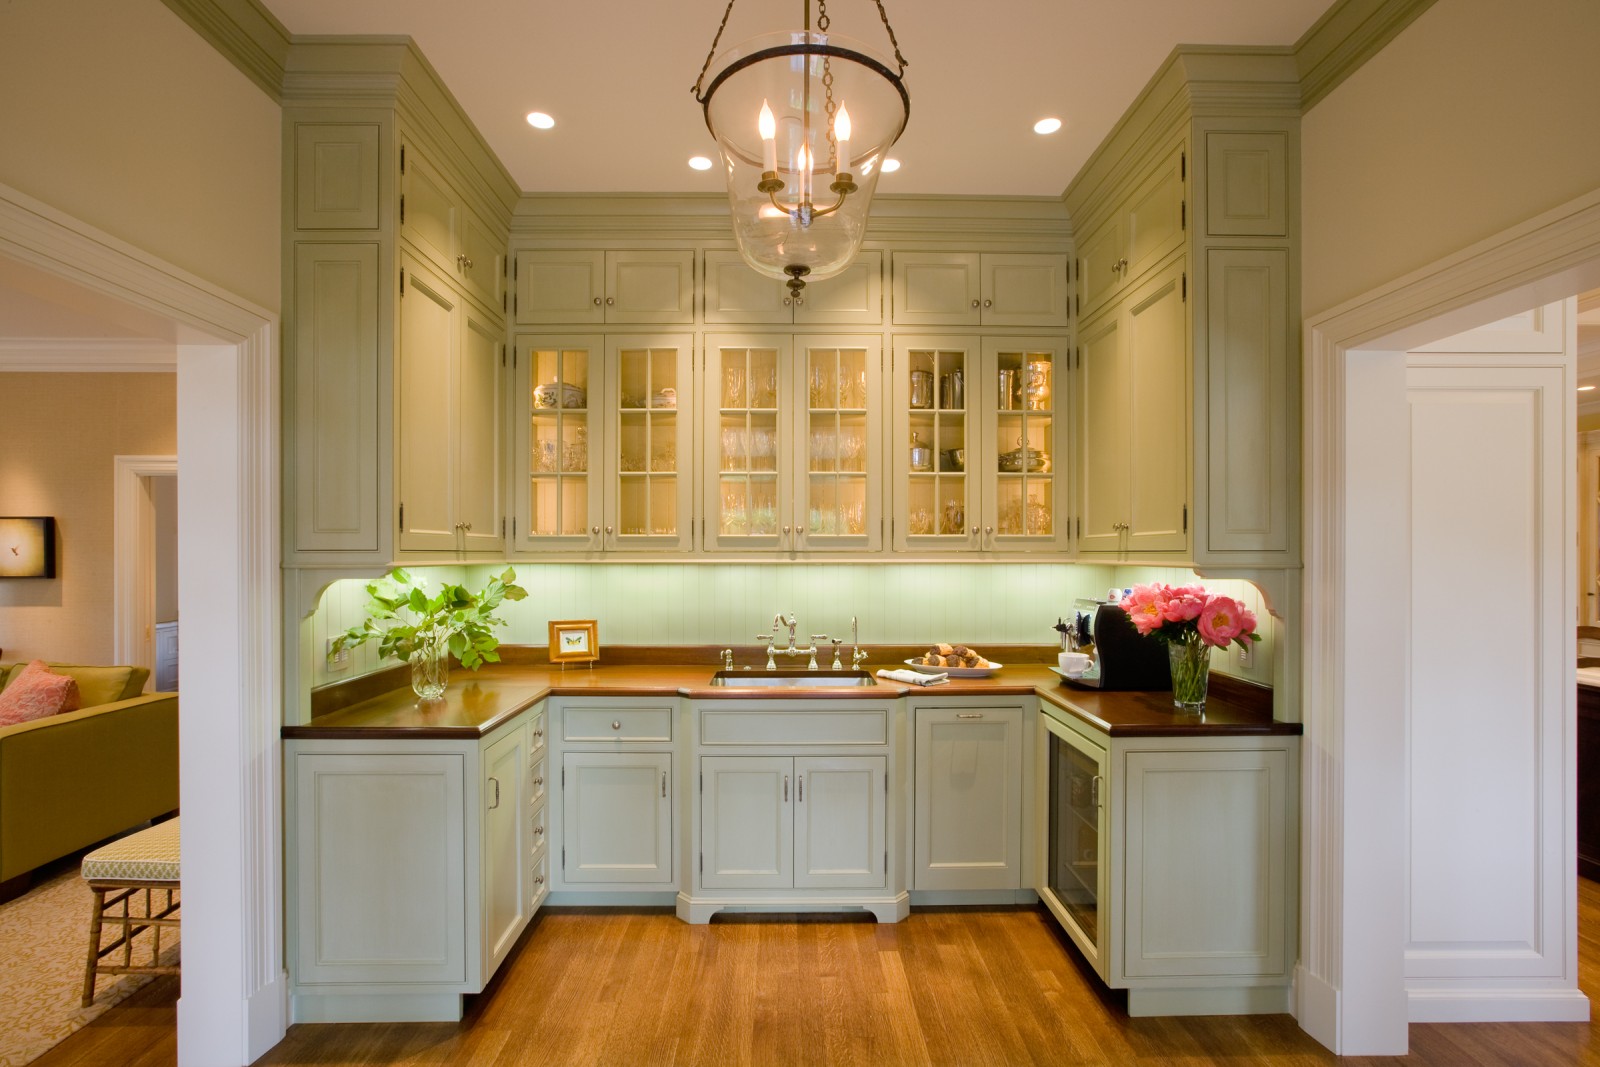 A kitchen with green cabinets offering two resale value boosting solutions for unused spaces.